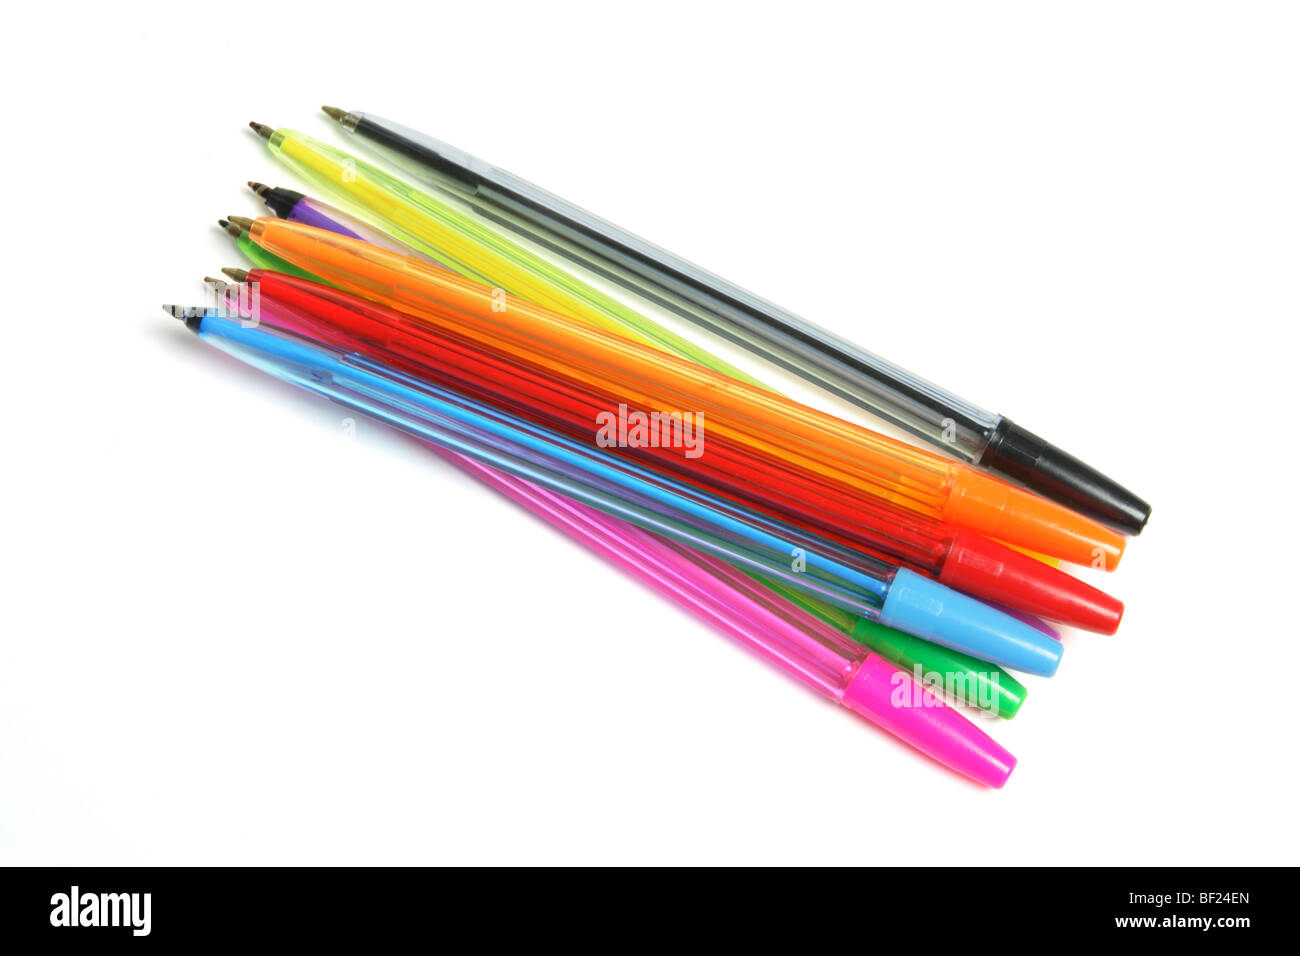 Colored Ballpoint Pens